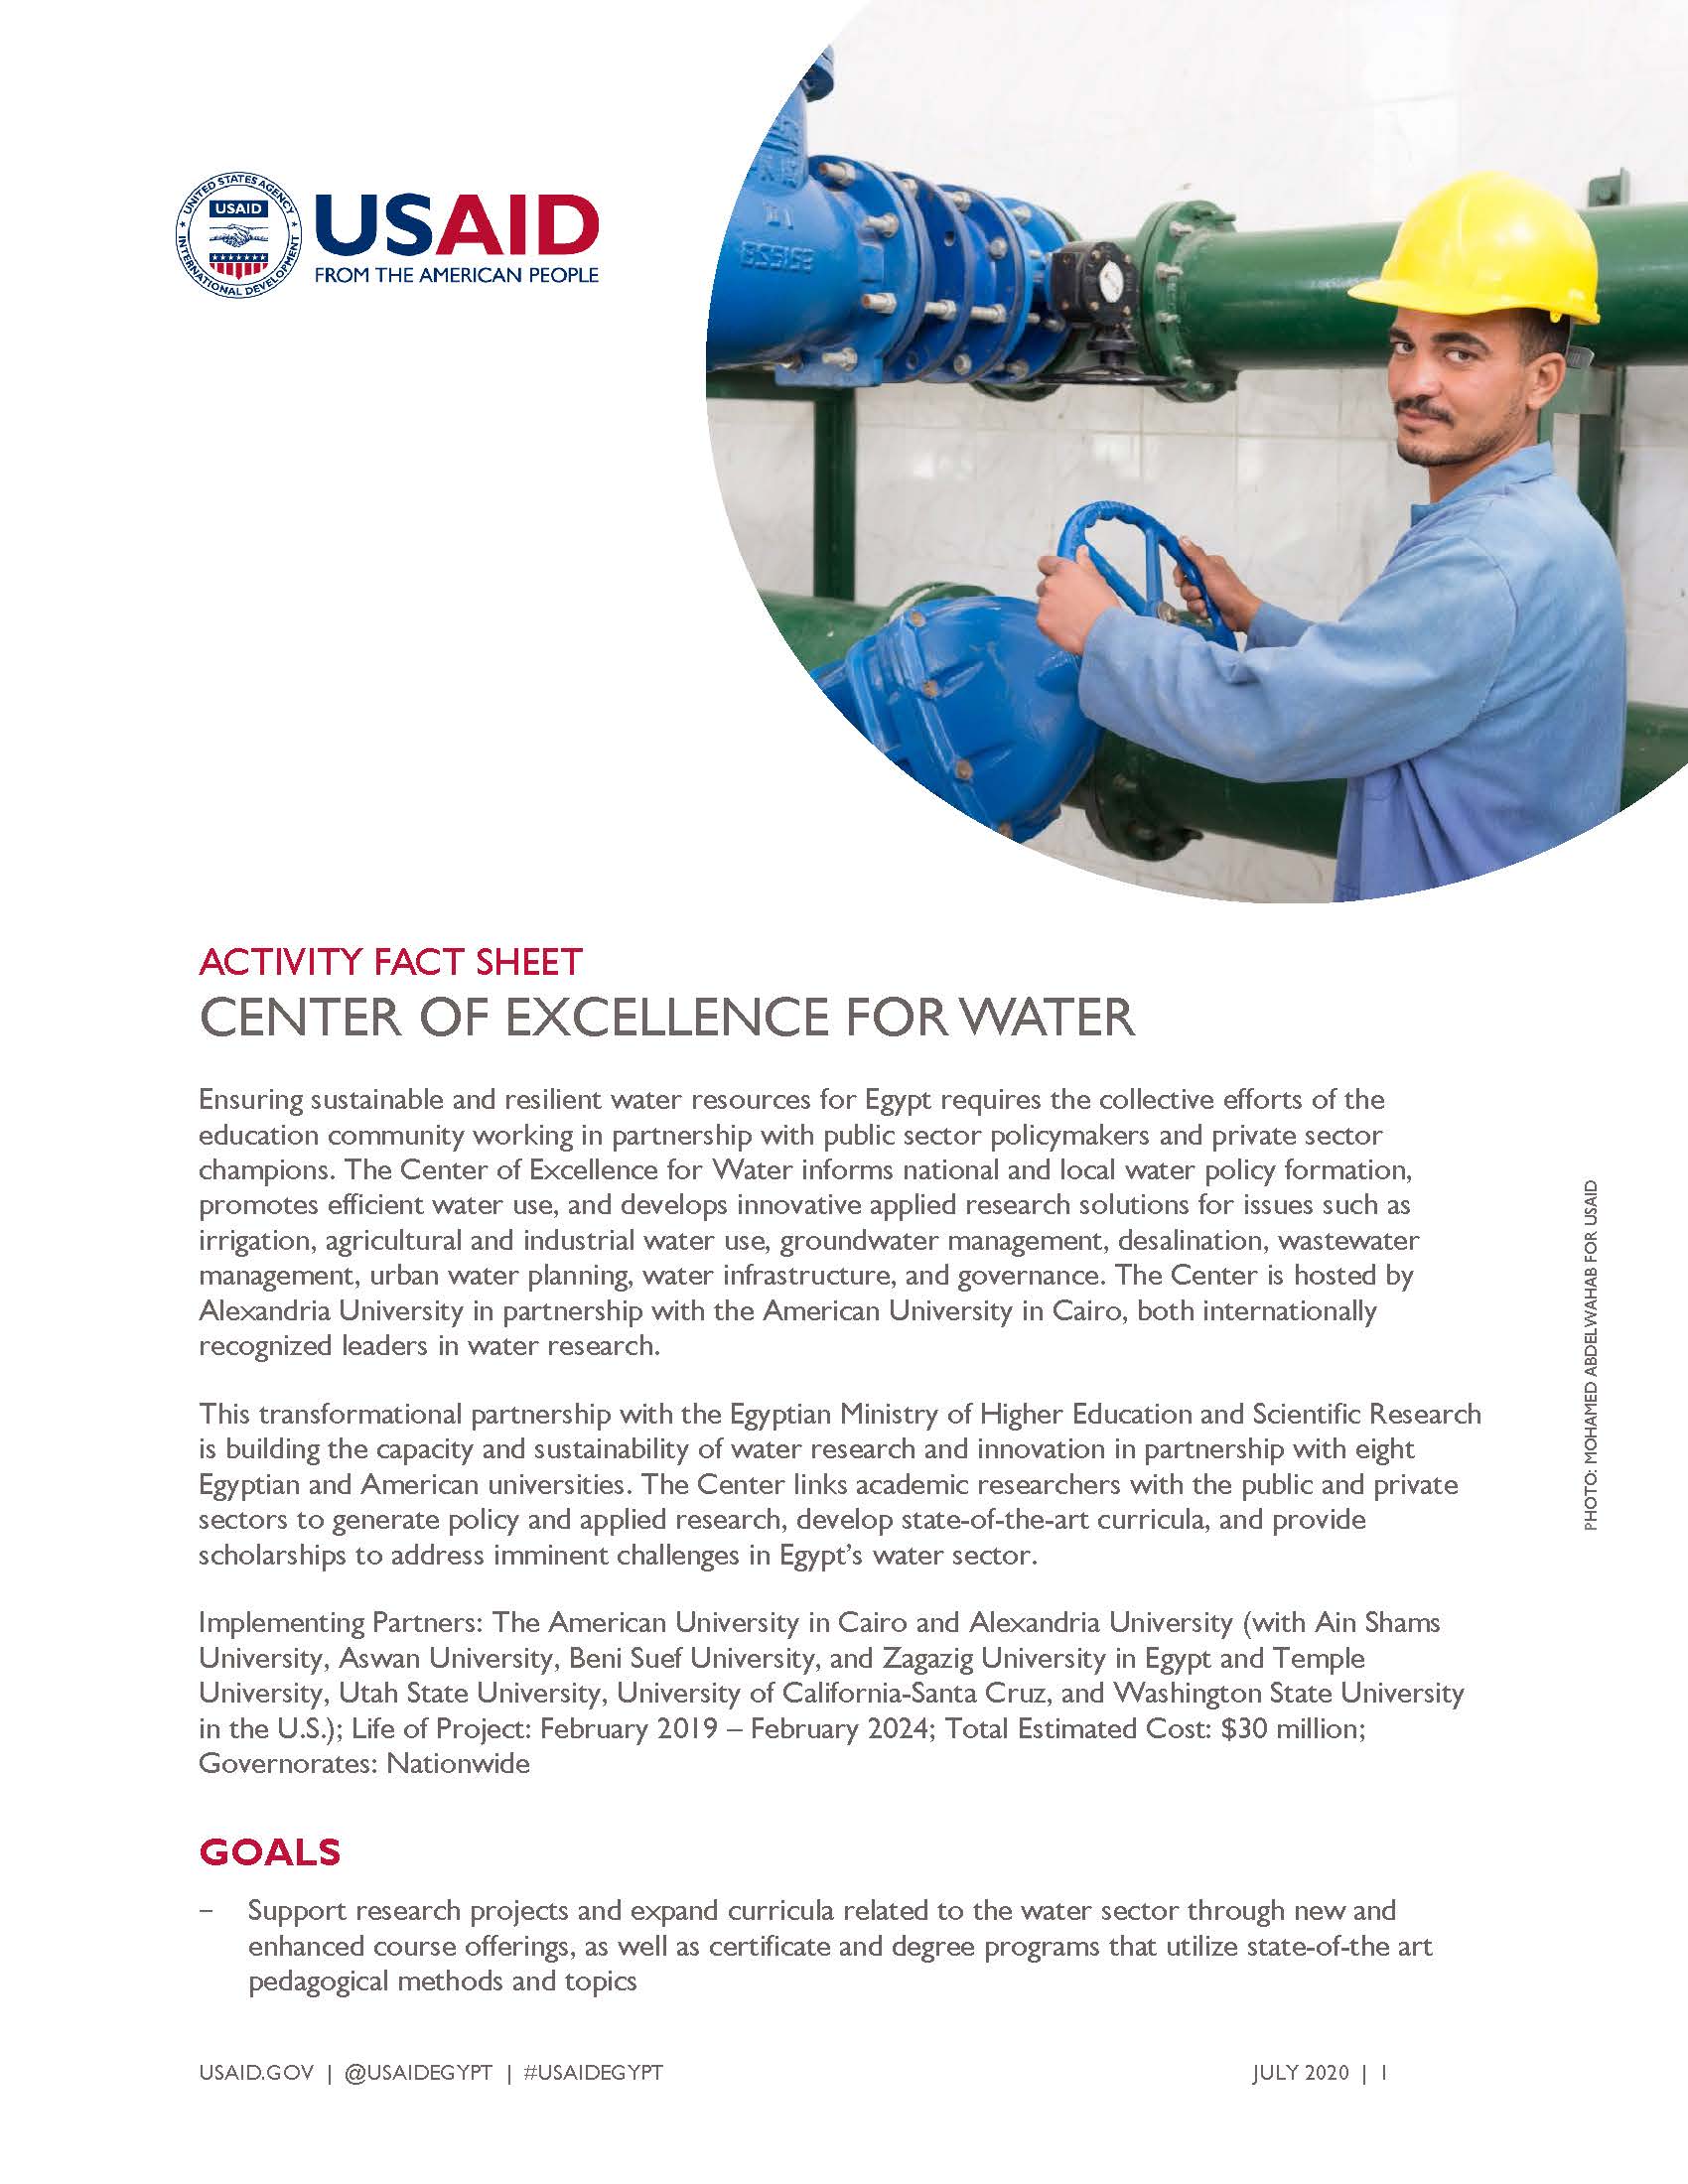 USAID/Egypt Activity Fact Sheet: Center of Excellence for Water